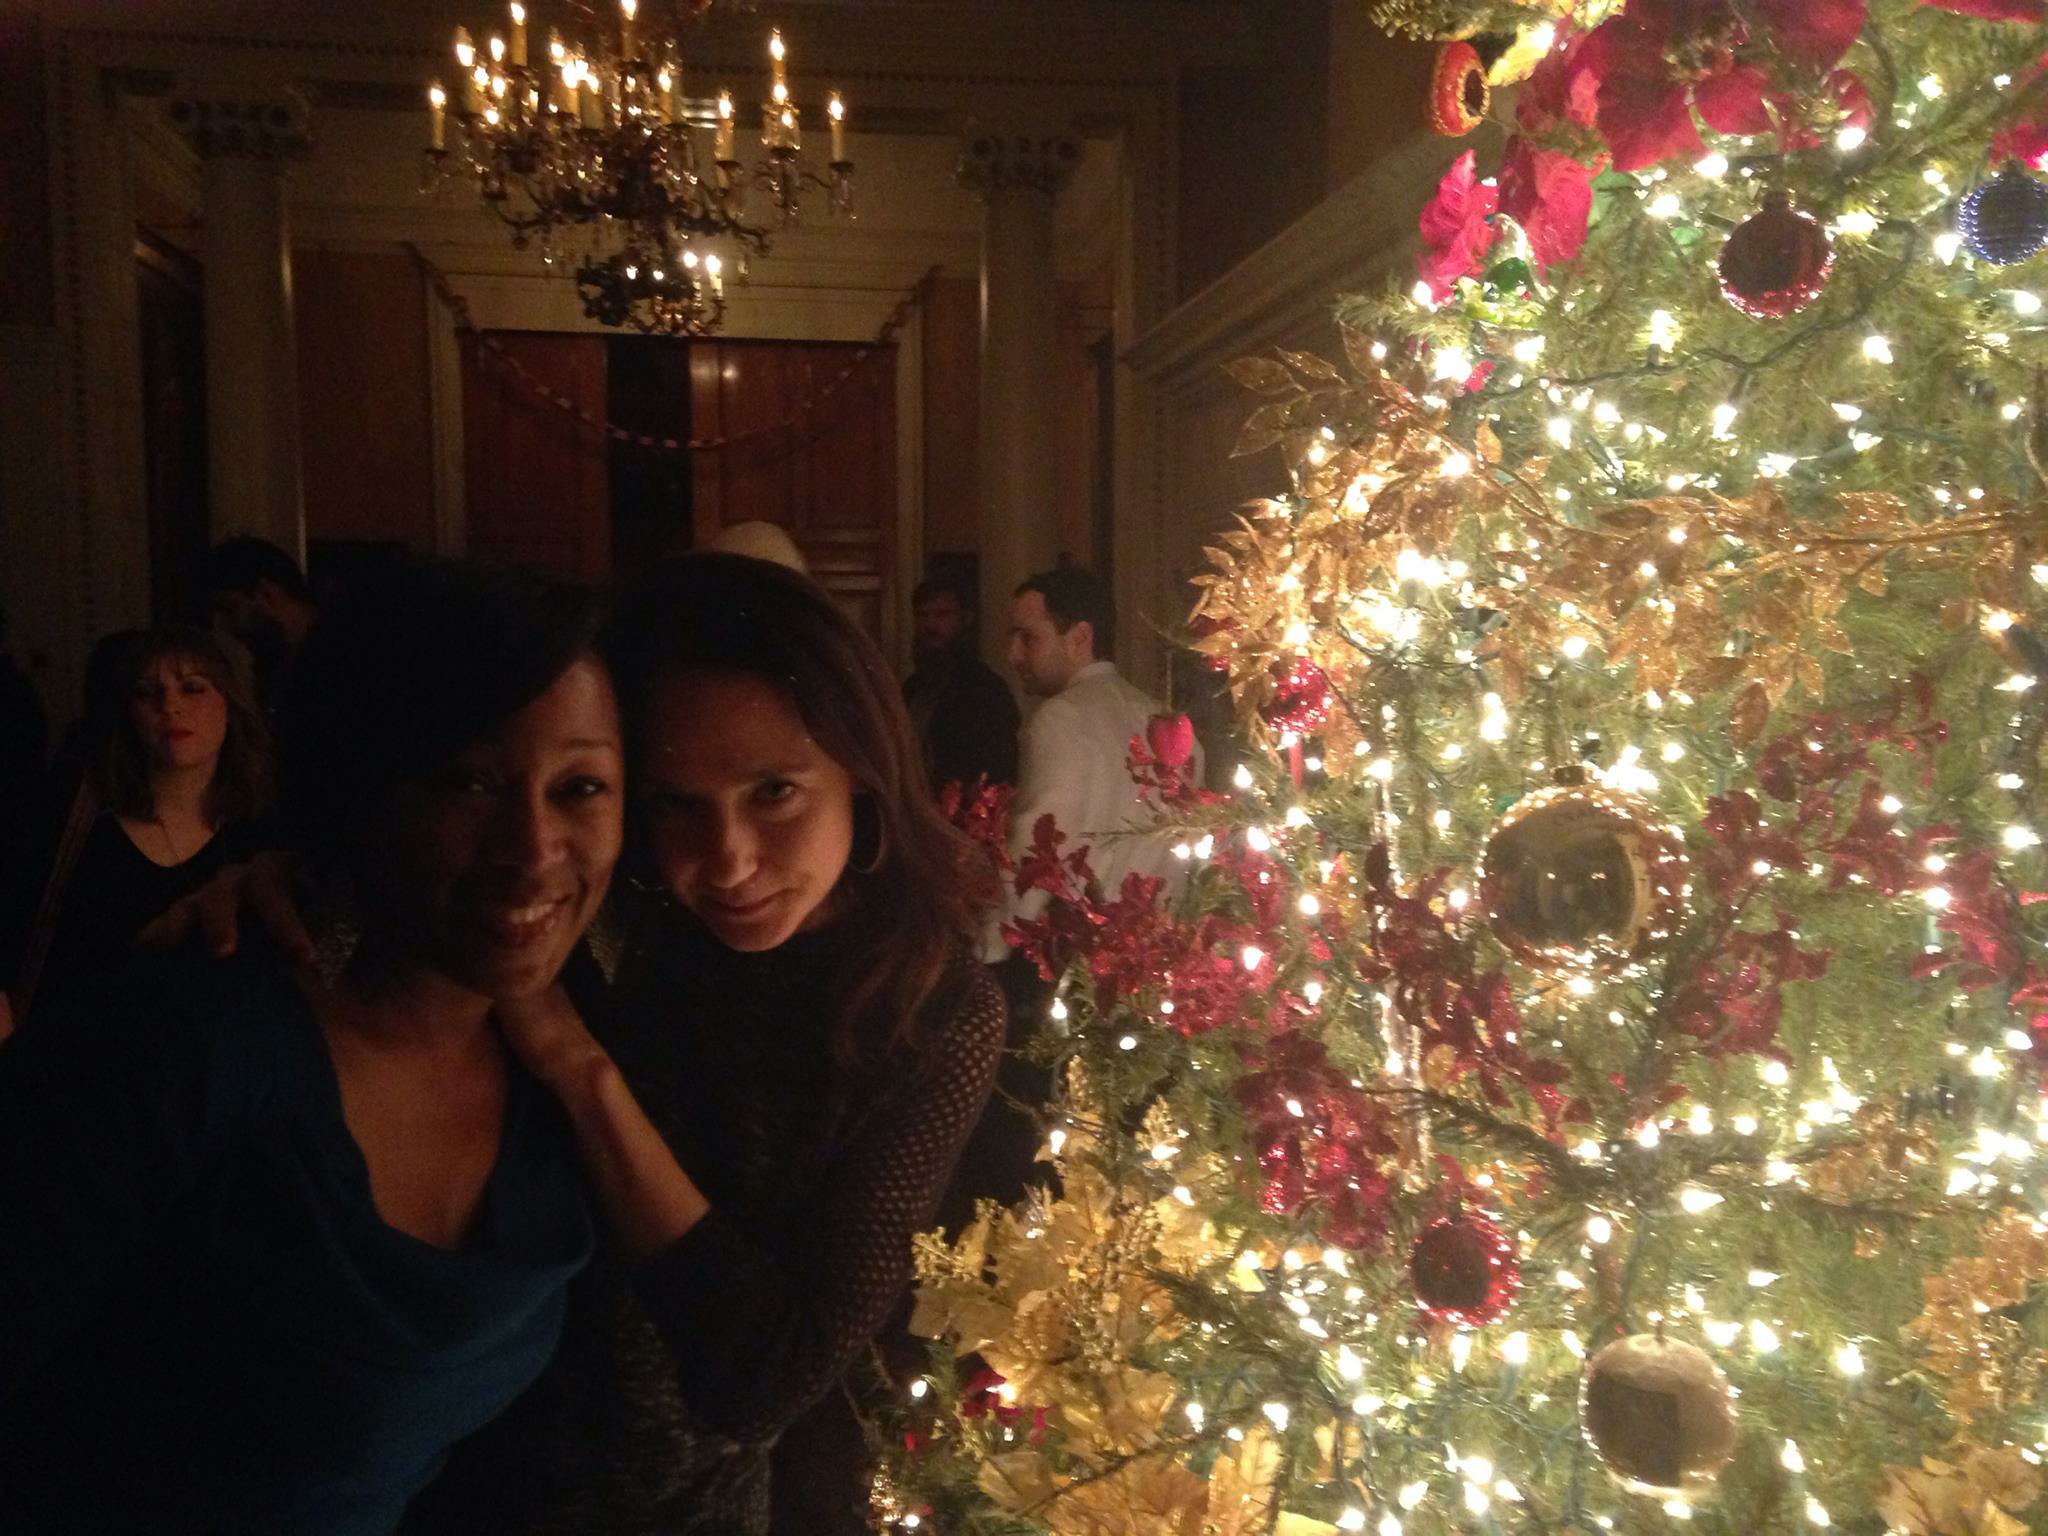 Holiday gathering with my dear friend Maja Wampuszyc co-star in The Immigrant with Marion Cotillard and Joaquin Phoenix